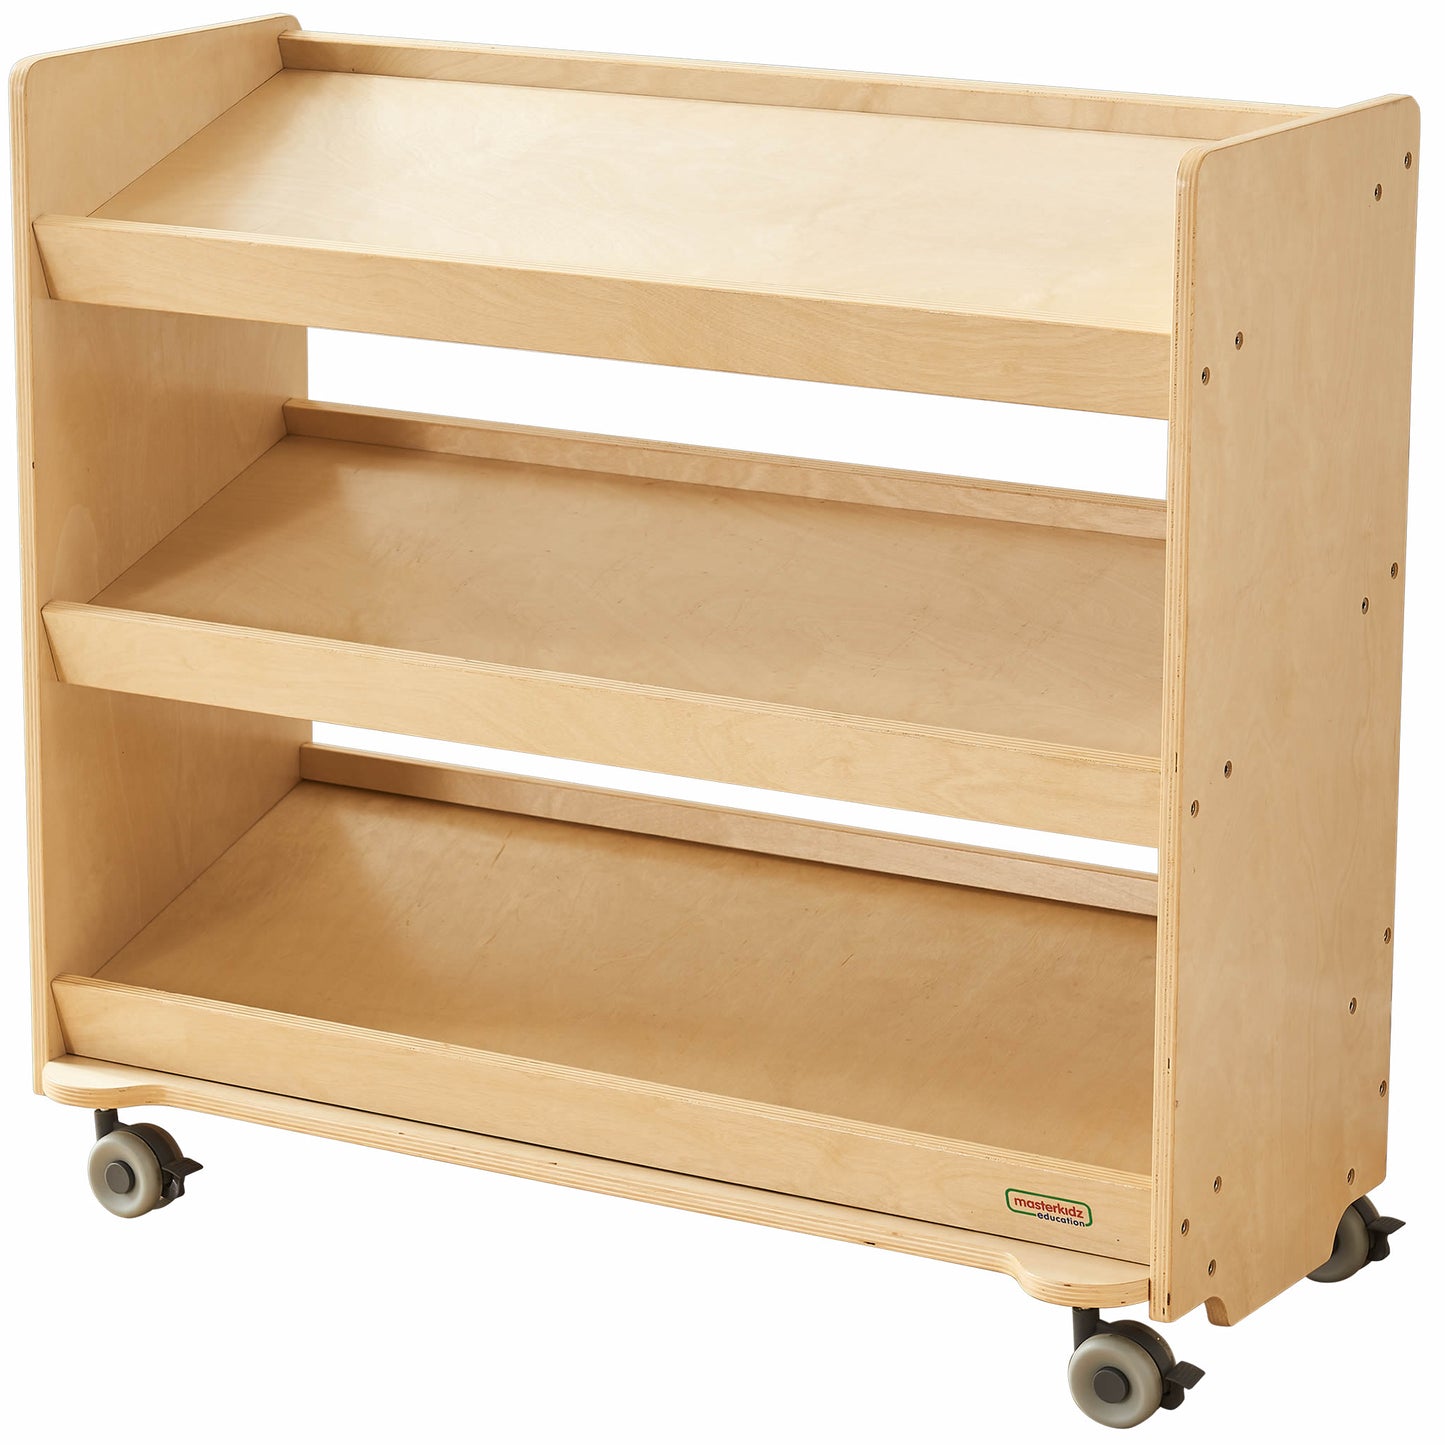 Masterkidz 800H x 880L Mobile Inclined Shelving Unit Trays Not Included 移動 3 層手推車-傾斜層板